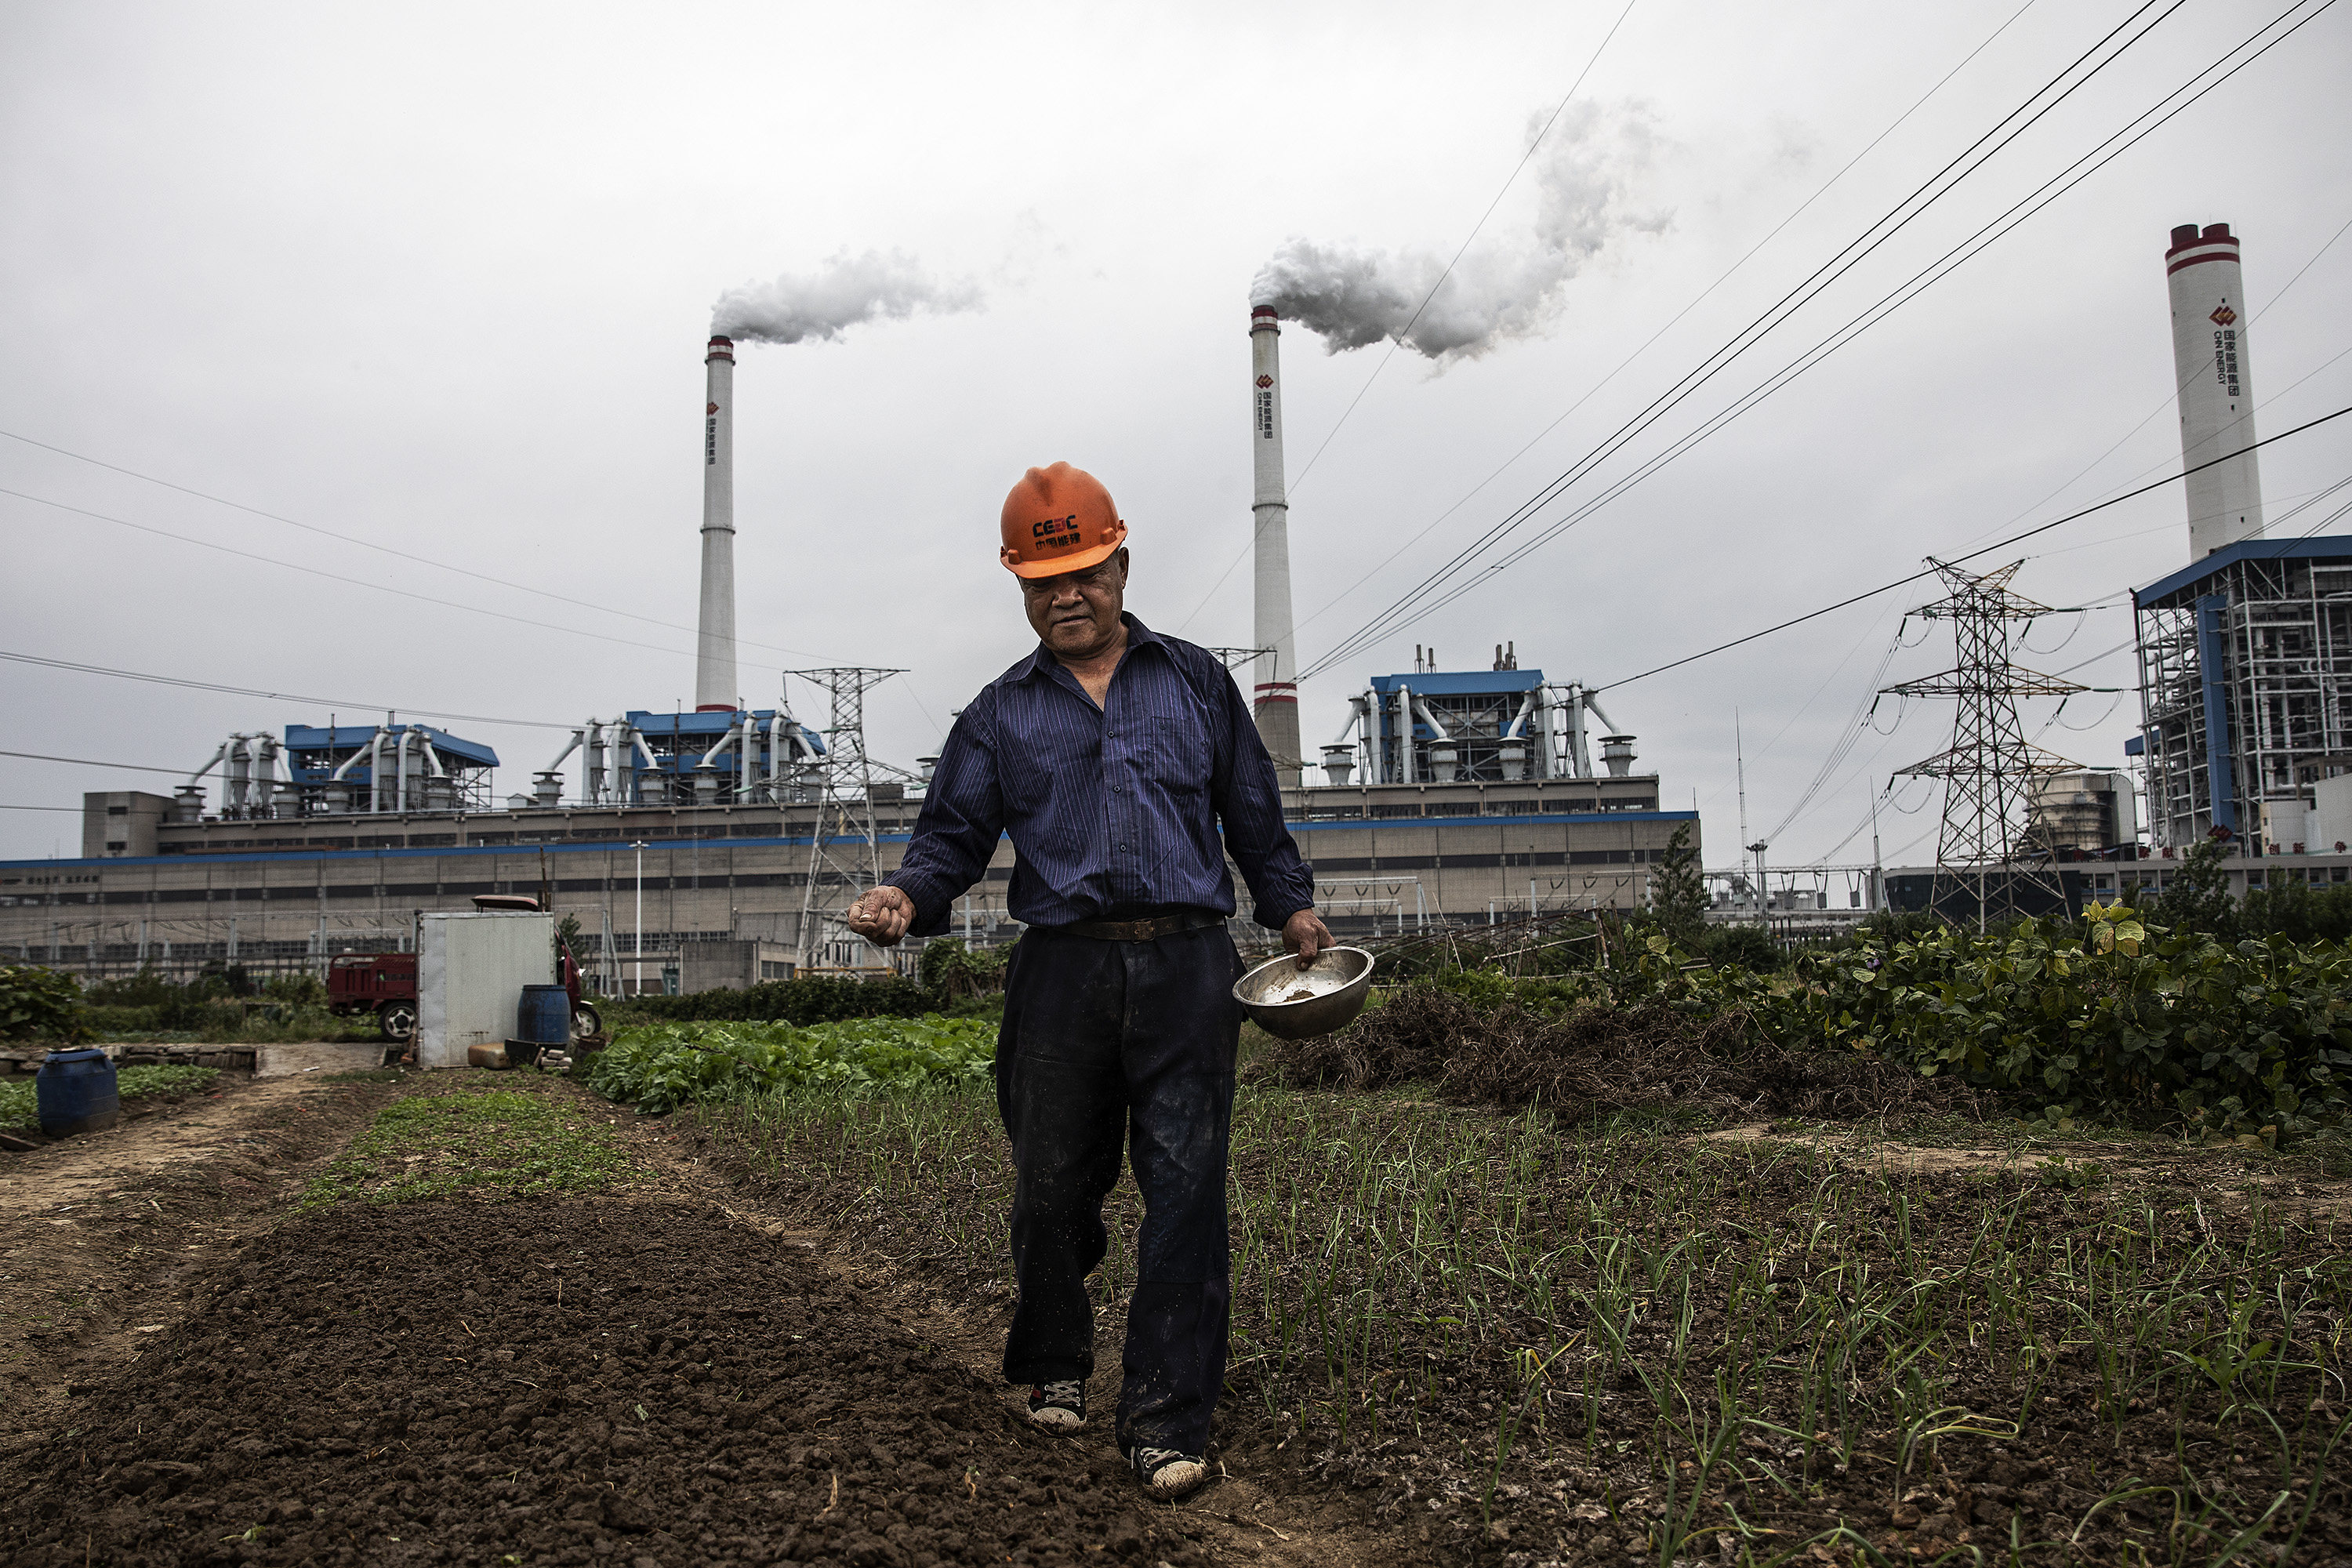 A man waters plants in front of a coal-fired power plant in Hanchuan, China’s Hubei province, on October 13, 2021. Photo: Getty Images